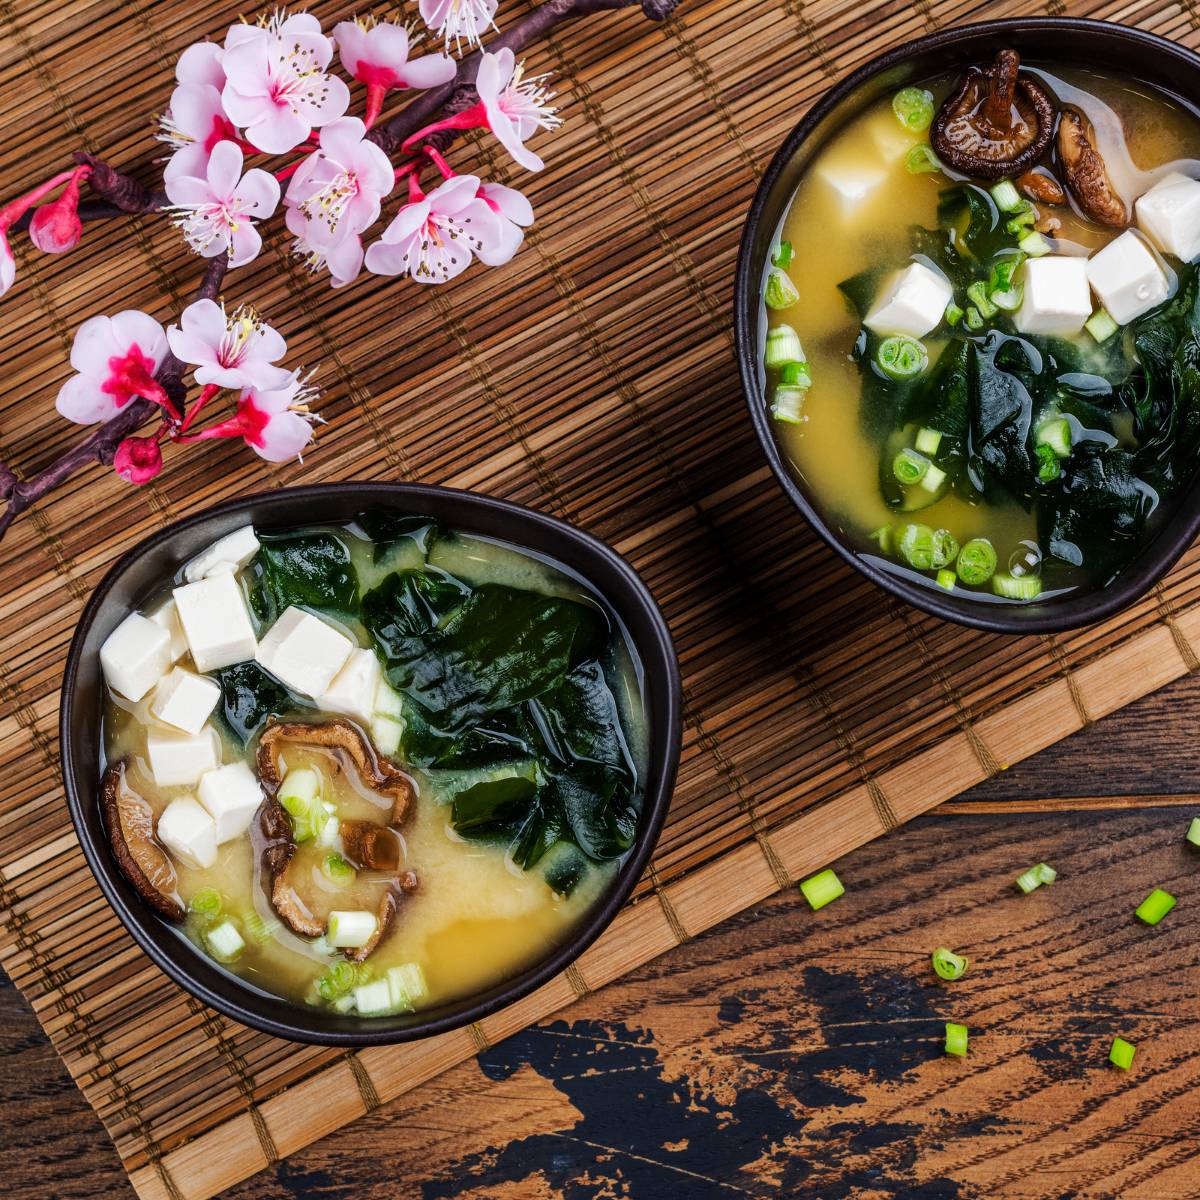 Bowls of miso soup made from miso paste